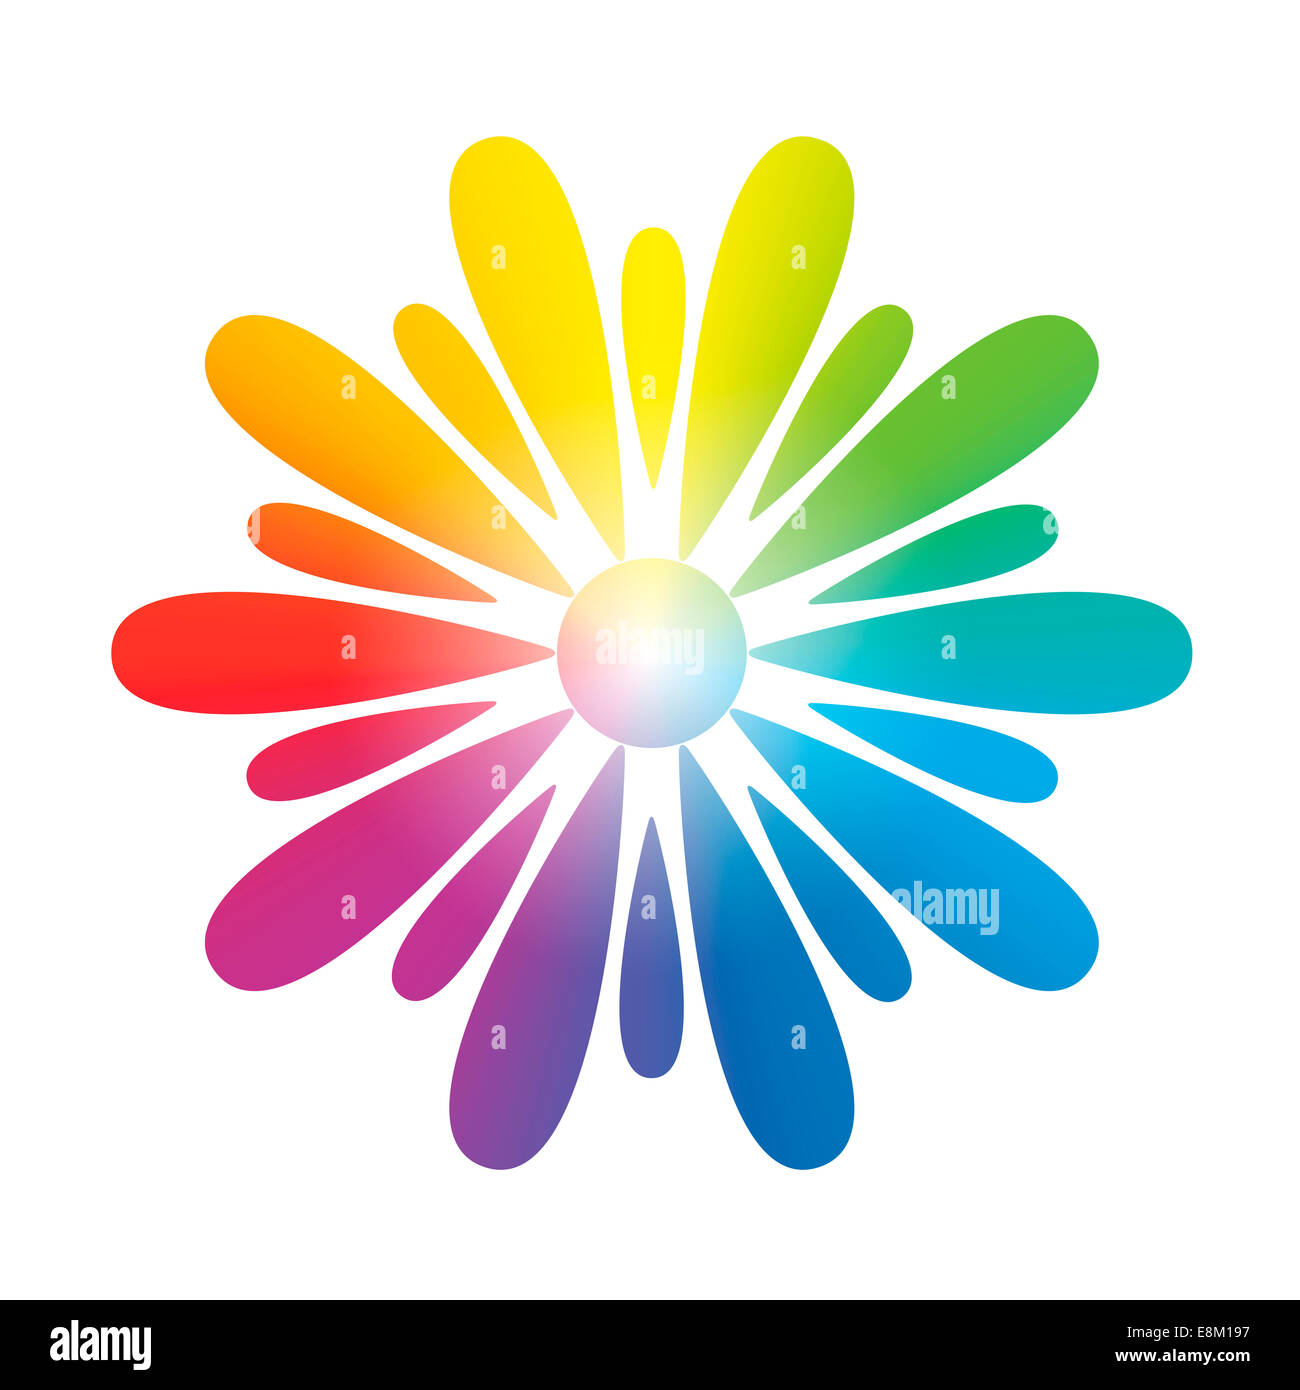 Flower symbol with circular rainbow gradient coloring. Stock Photo